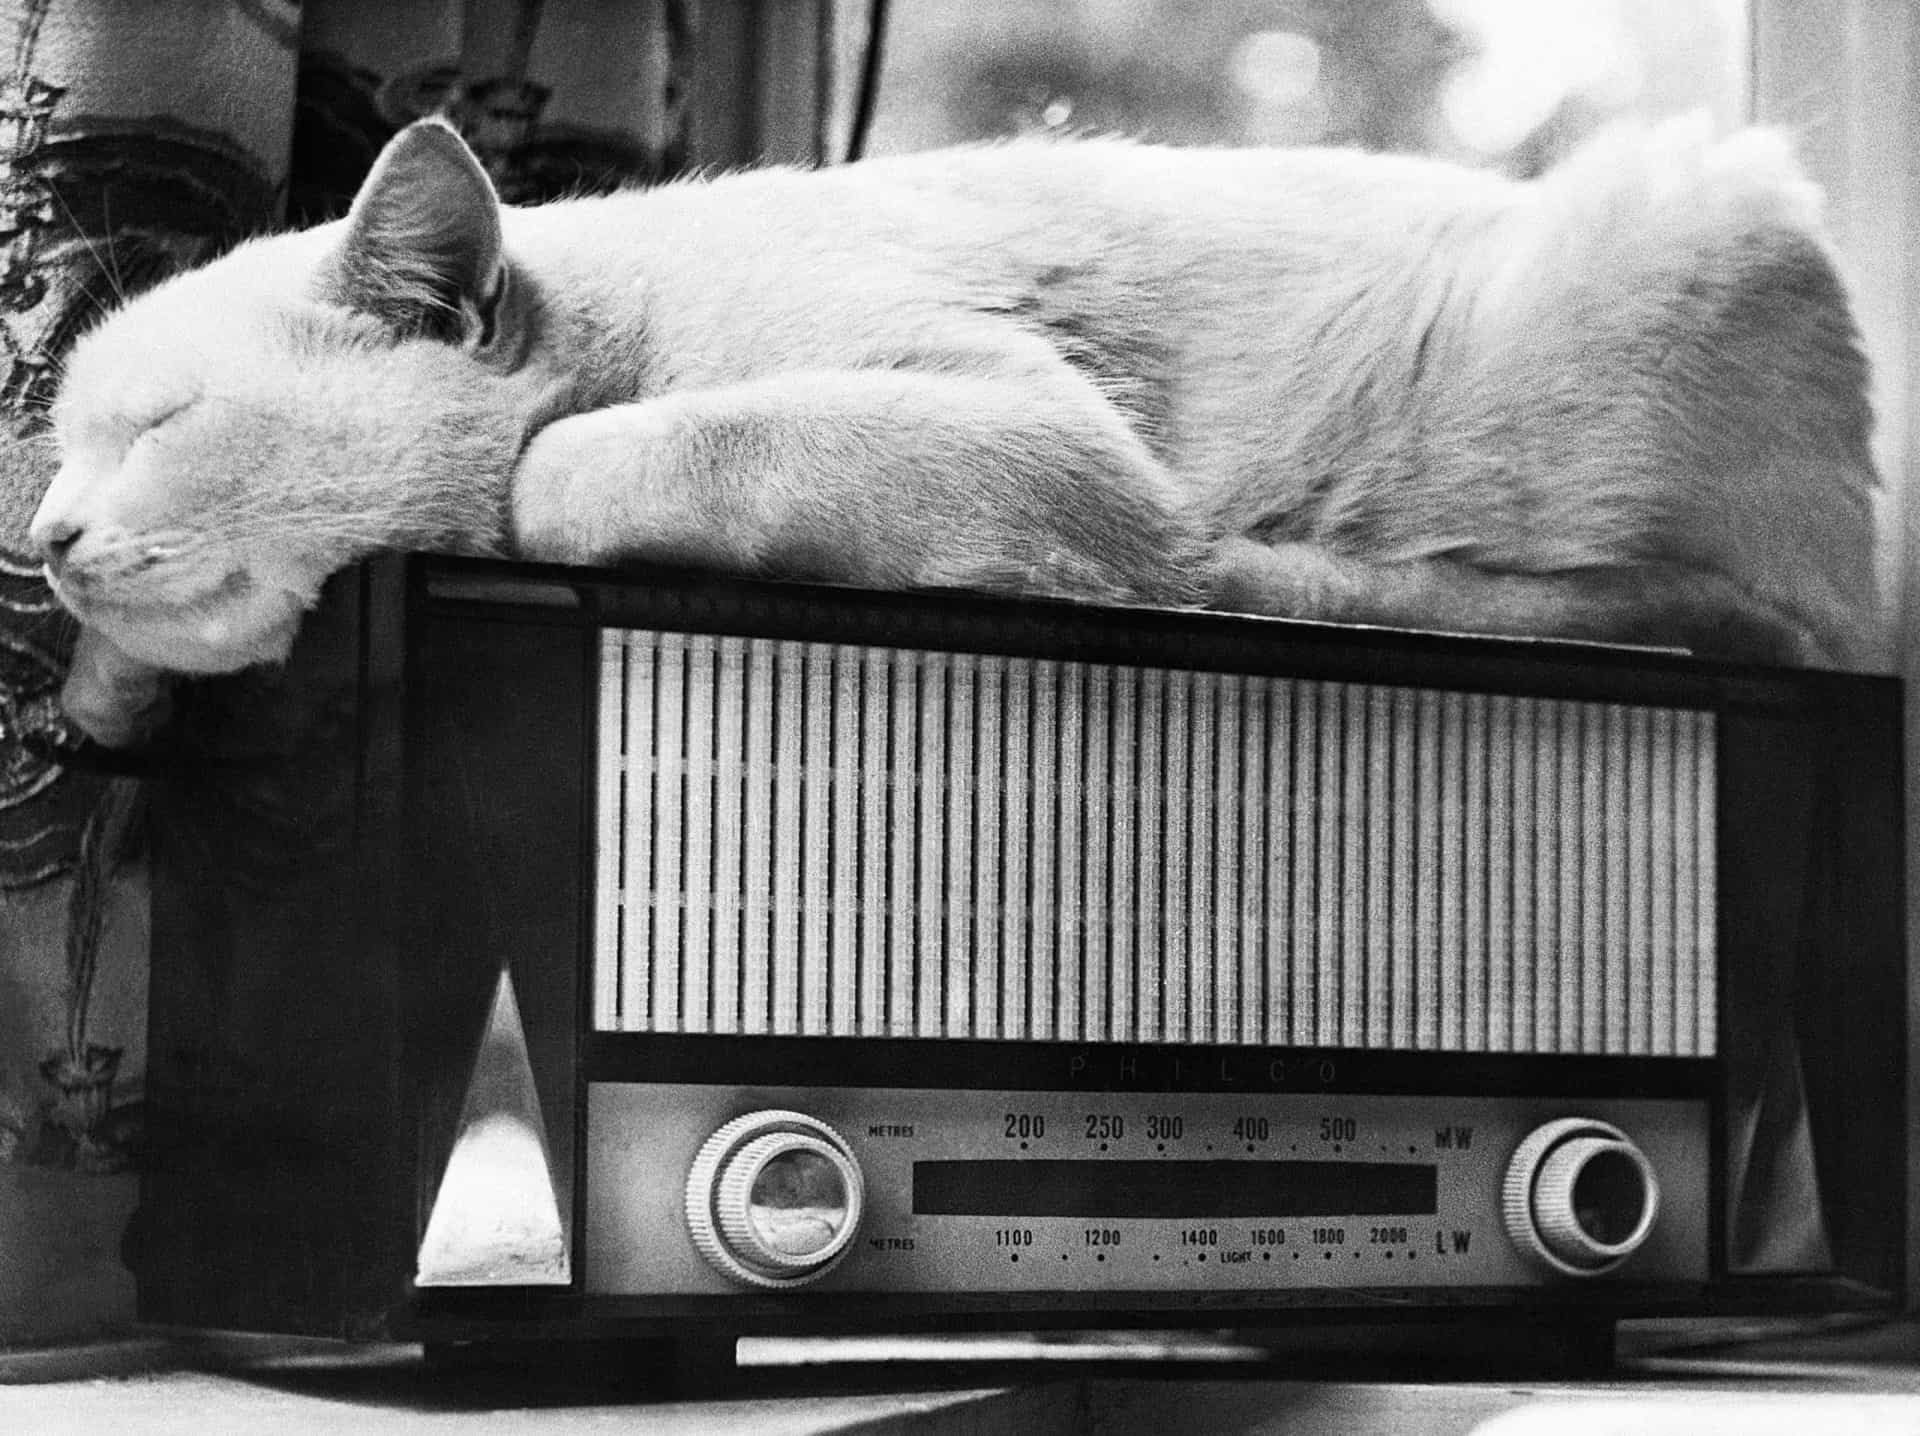 <p>Secret projects developed by the CIA during the Cold War ranged from the sinister to the truly comical. Launched in the 1960s, Operation Acoustic Kitty saw cats fitted with listening devices implanted in their ears in order to "spy" on the Kremlin and Soviet embassies.</p>